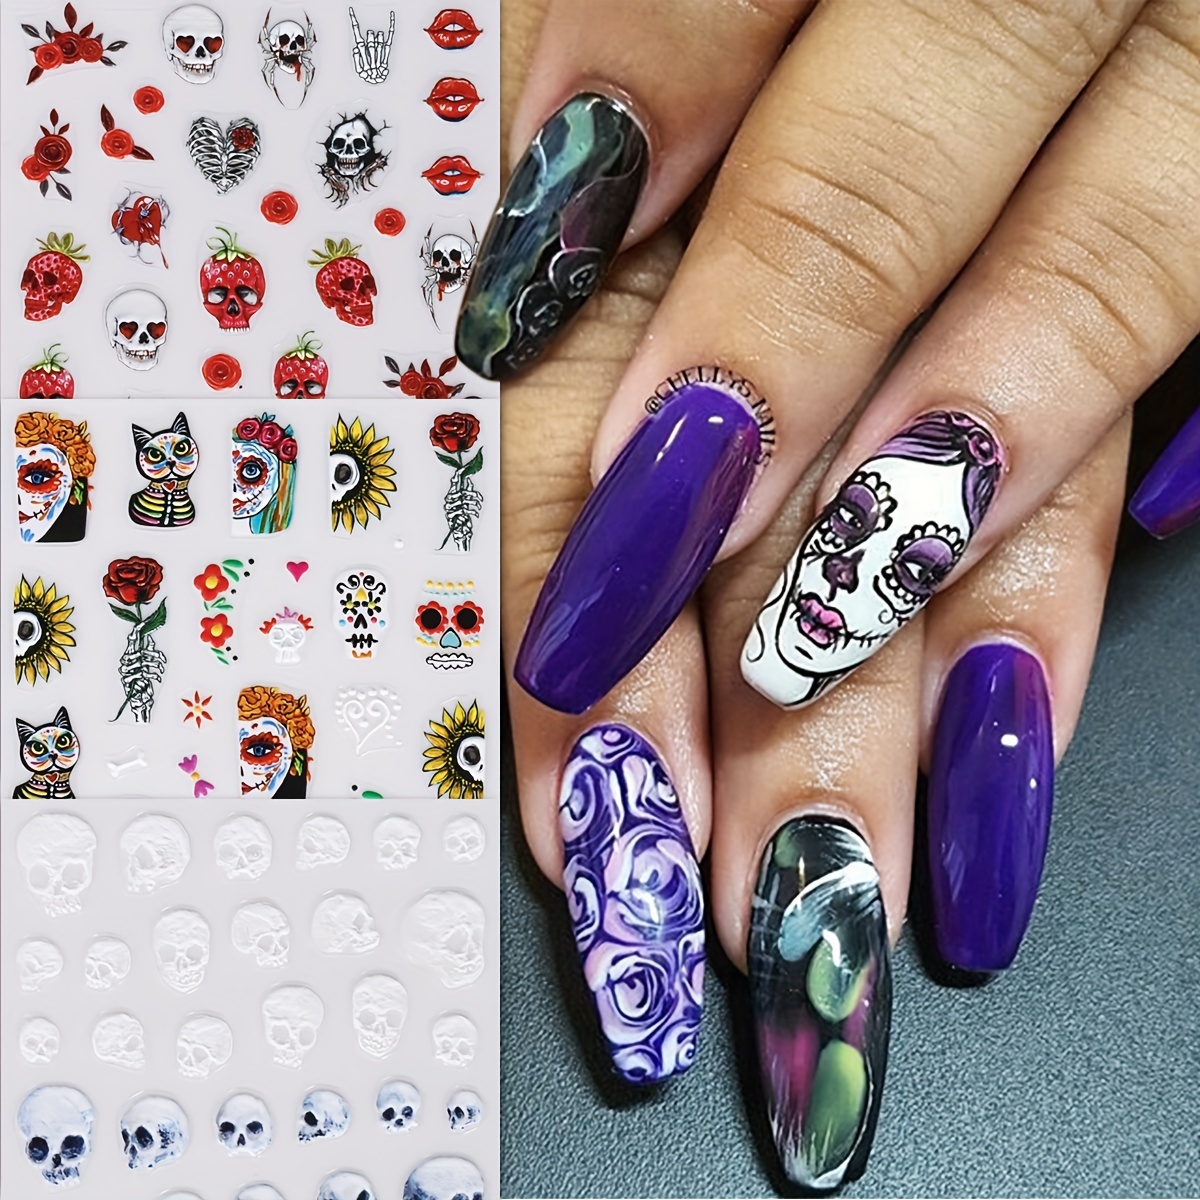 9 Sheets Halloween Nail Art Stickers Ghost 3D Nail Decals Spider